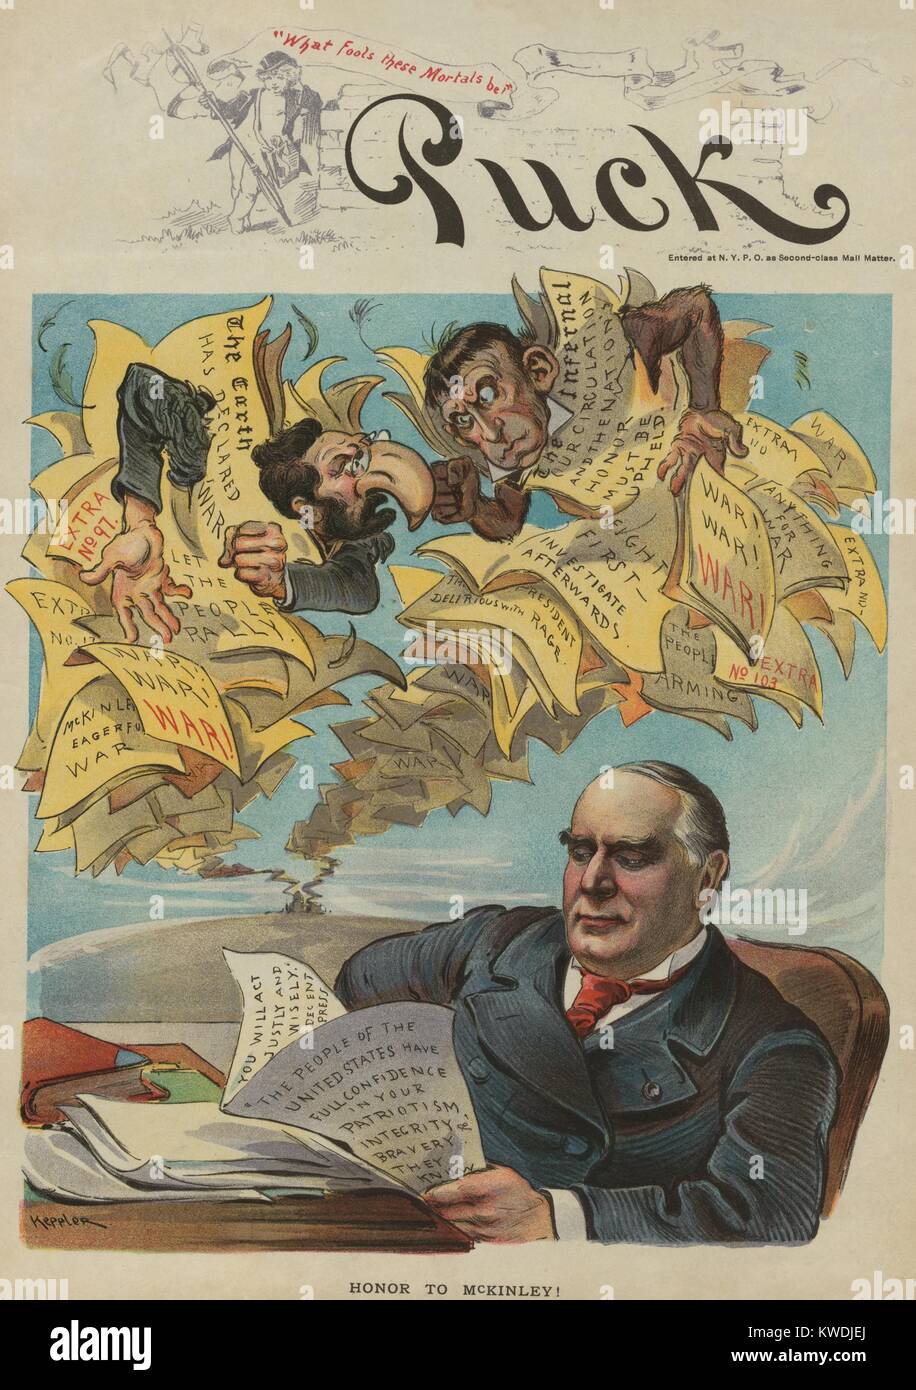 HONOR TO MCKINLEY! Political cartoon from Puck Magazine, Mar. 23, 1898. President William McKinley resists the hawkish Pulitzer and Hearst newspaper headlines urging war with Spain after the explosion of the USS MAINE in Havana Harbor on Feb. 15, 1898 (BSLOC 2017 10 9) Stock Photo